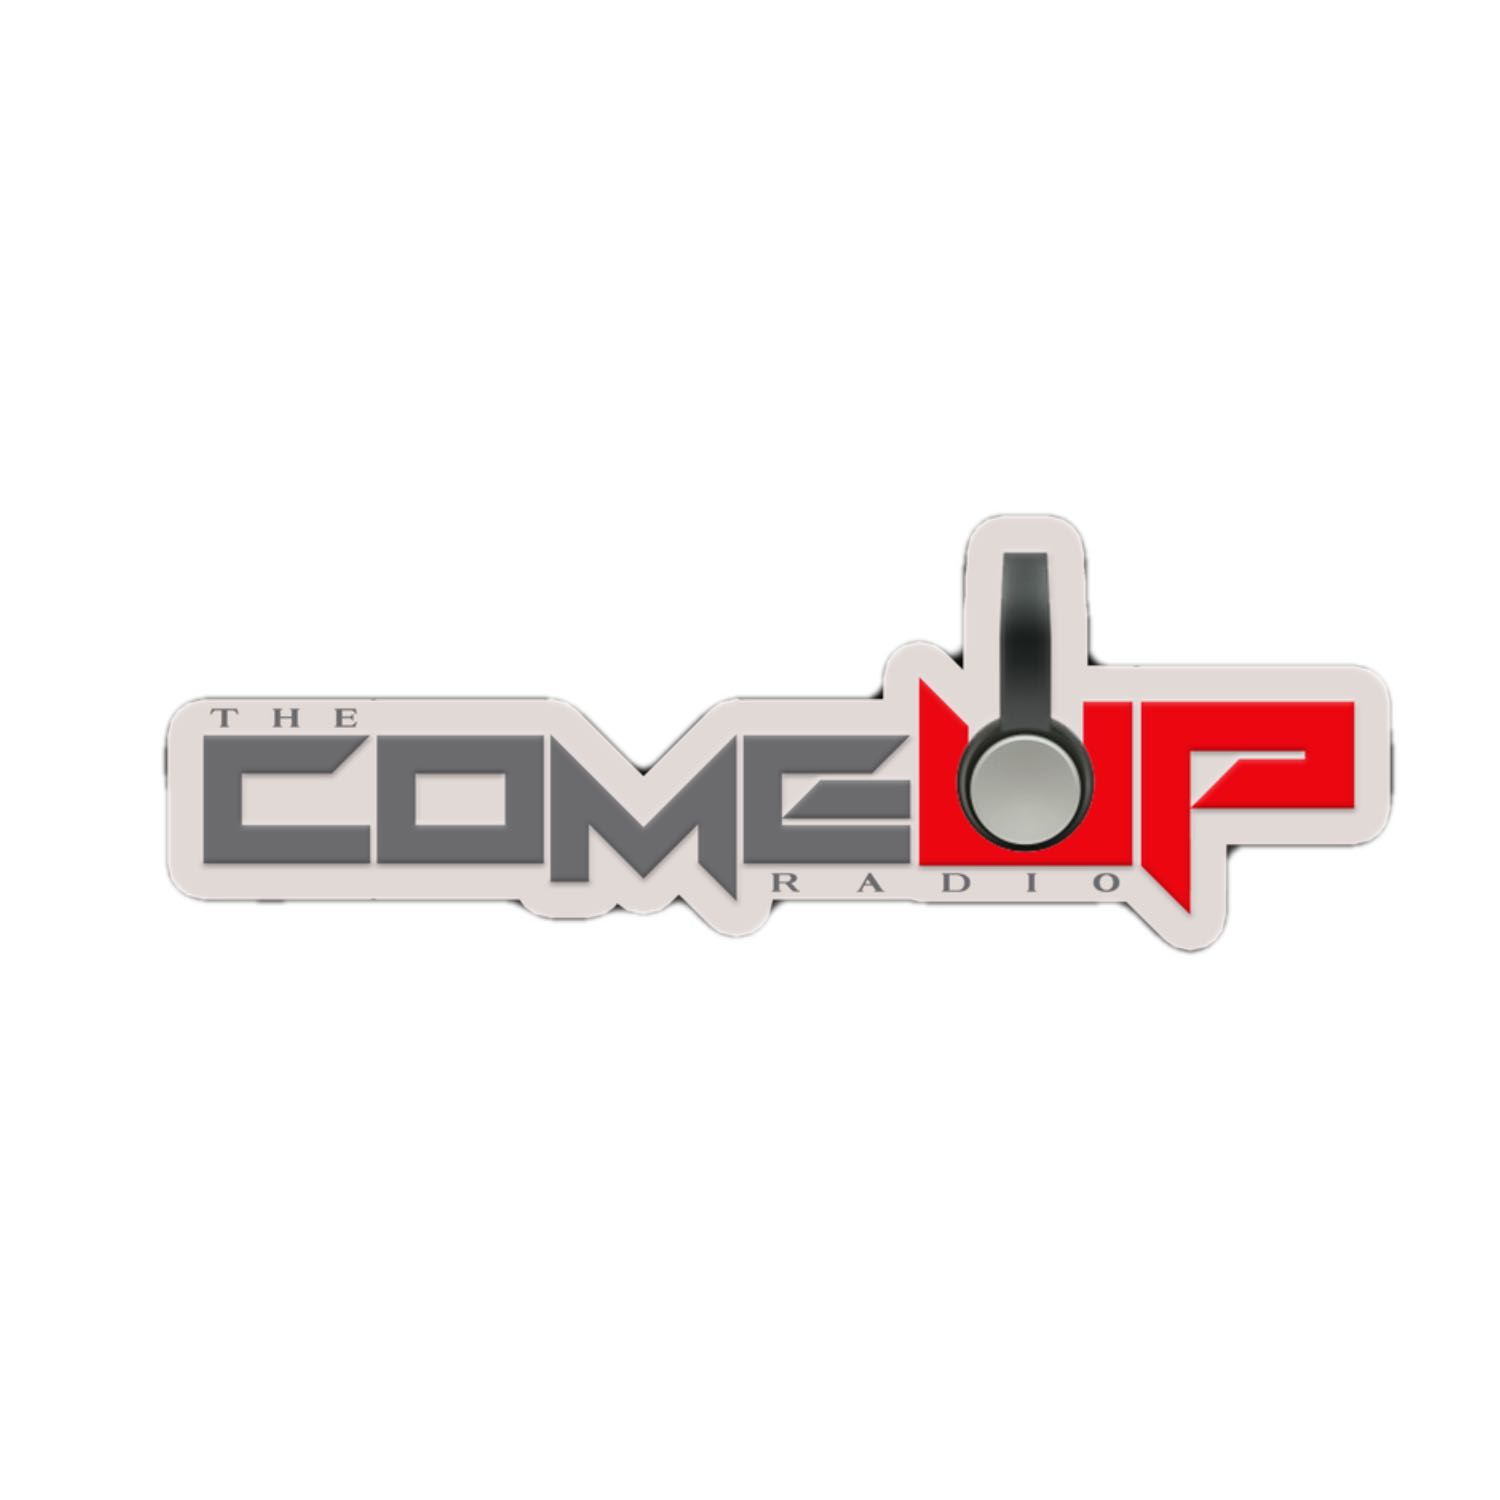 comeup radio station ft craig sauce brown talks comedy, his own liquor brand , networking & more ￼